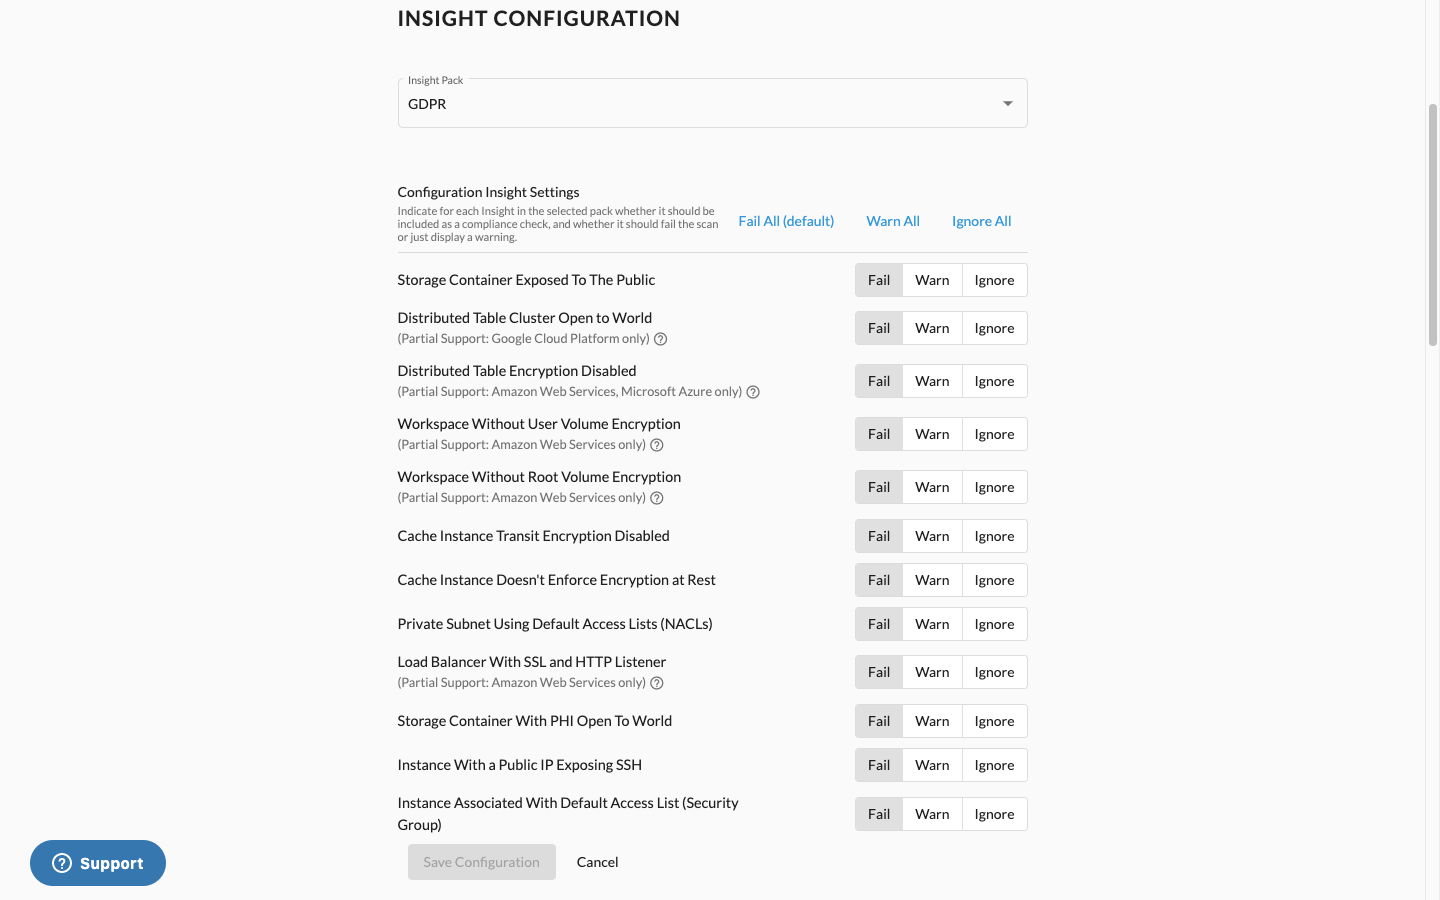 Configuring Insights